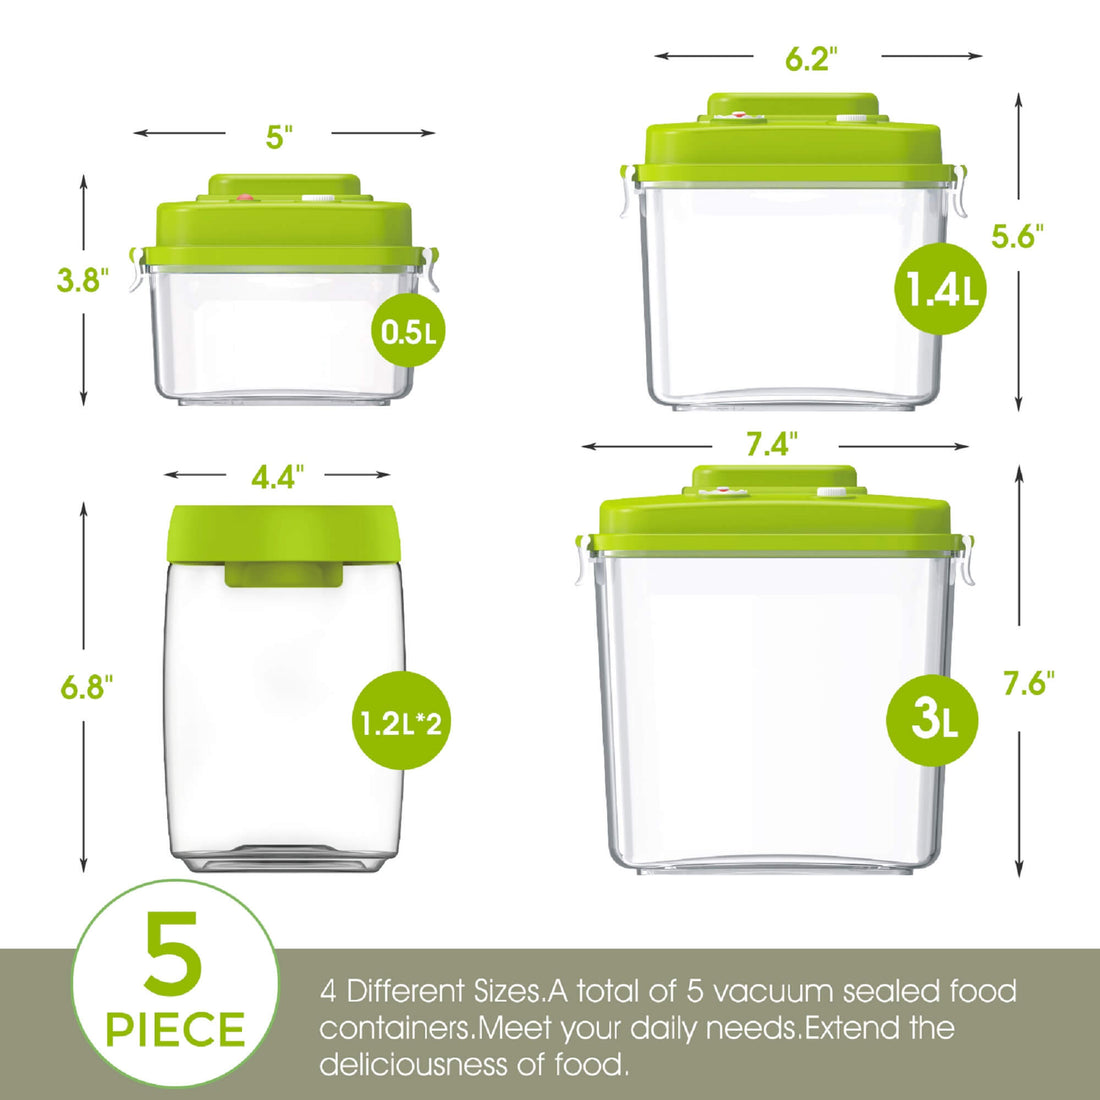 Airtight Food Containers - Set of 6 White (1.2L)